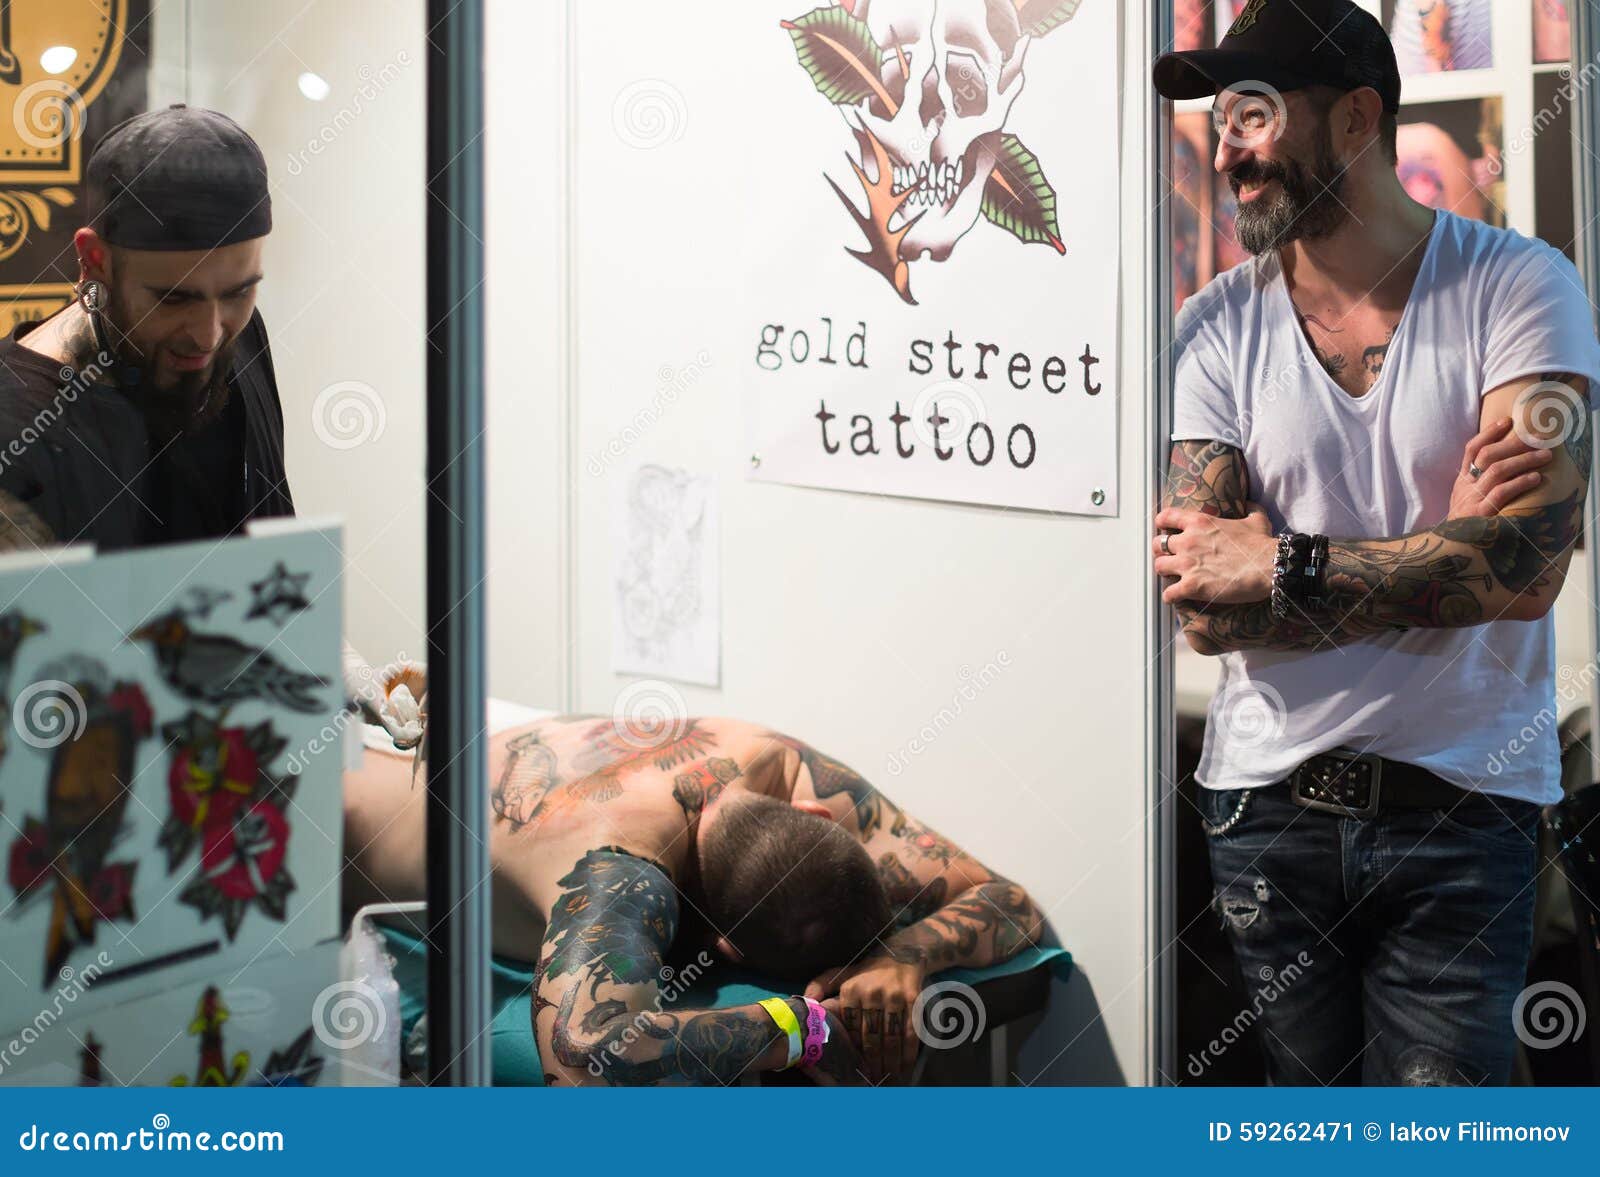 Tattoo Session Where Man Tattoo You Editorial Stock Photo  Stock Image   Shutterstock